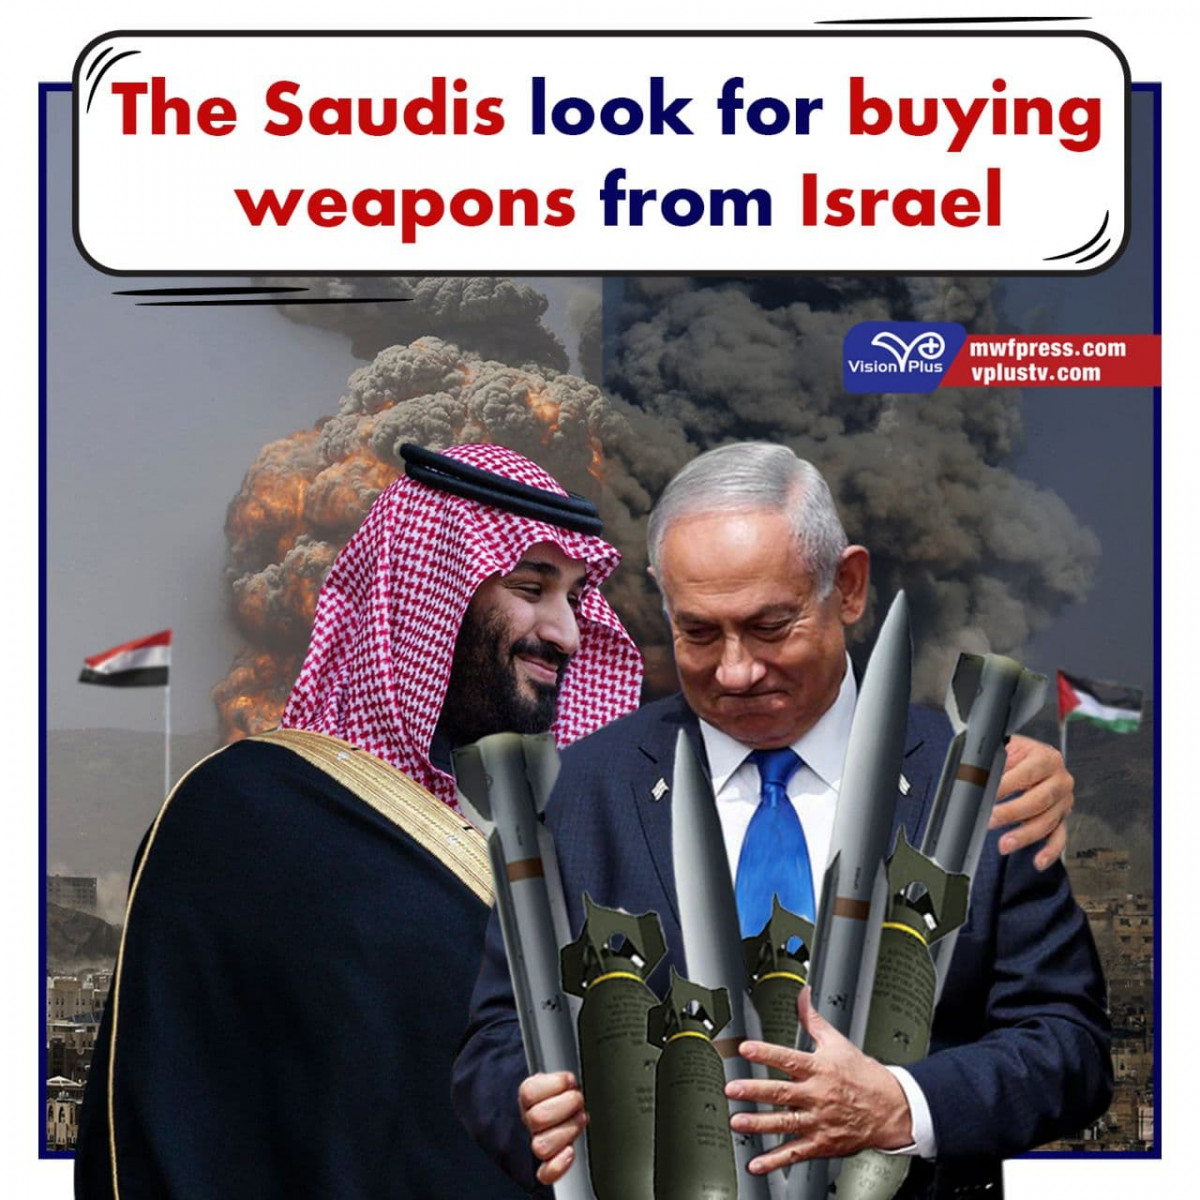 The Saudis look for buying weapons from Israel